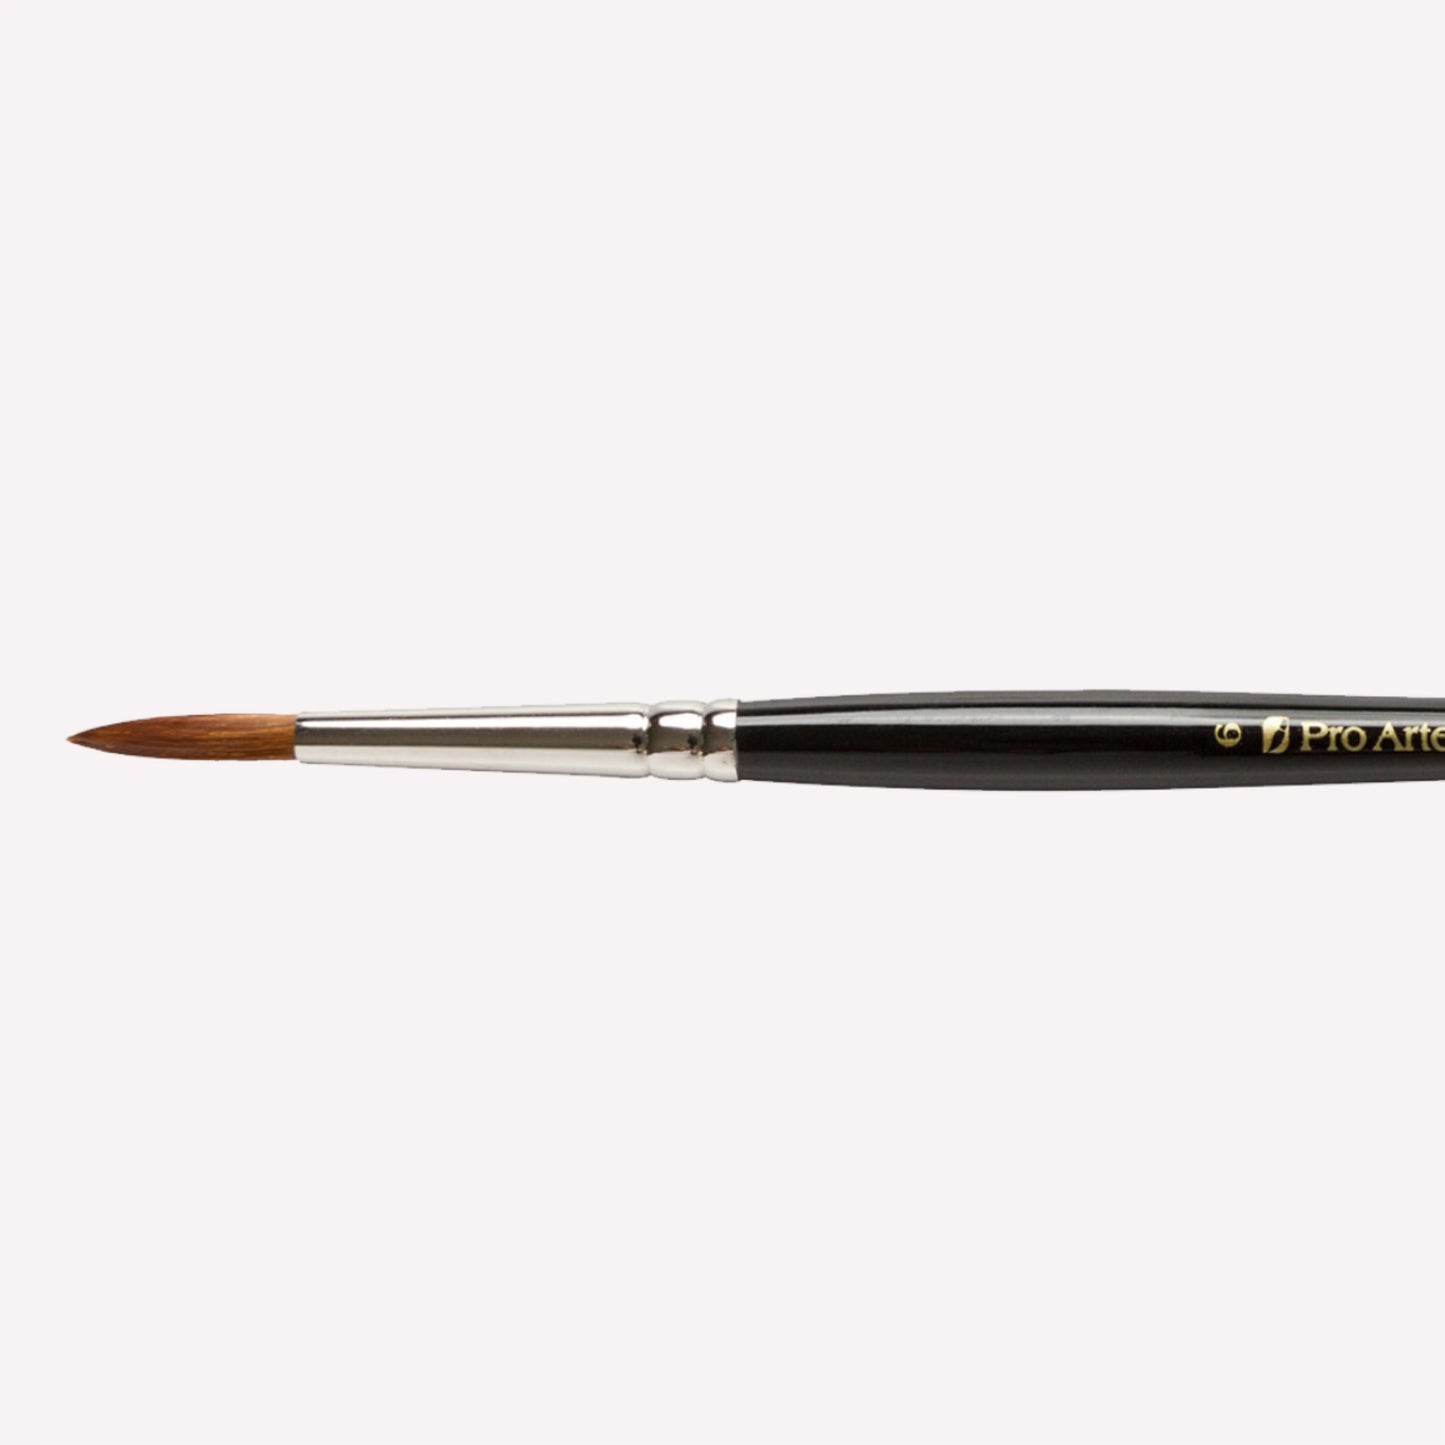 Pro Arte’s Prolene round paintbrush in size 101-6. Brushes have synthetic bristles, an ergonomic black handle and a silver ferrule. 